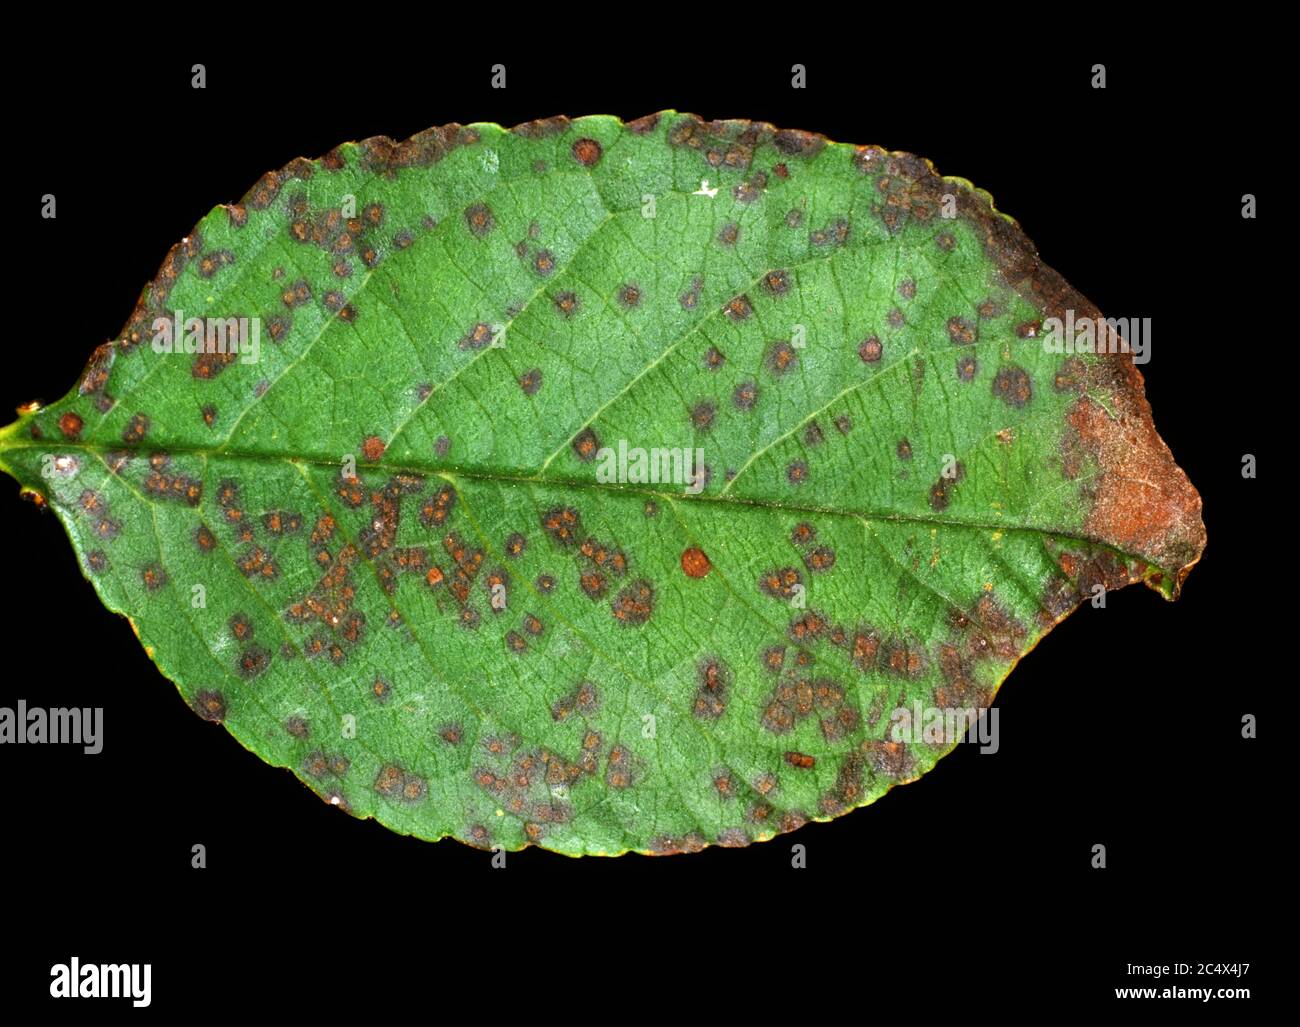 Cherry leaf spot (Blumeriella jaapii) small circular fungal disease lesions on the leaf of a sour cherry leaf, New York, USA, September Stock Photo